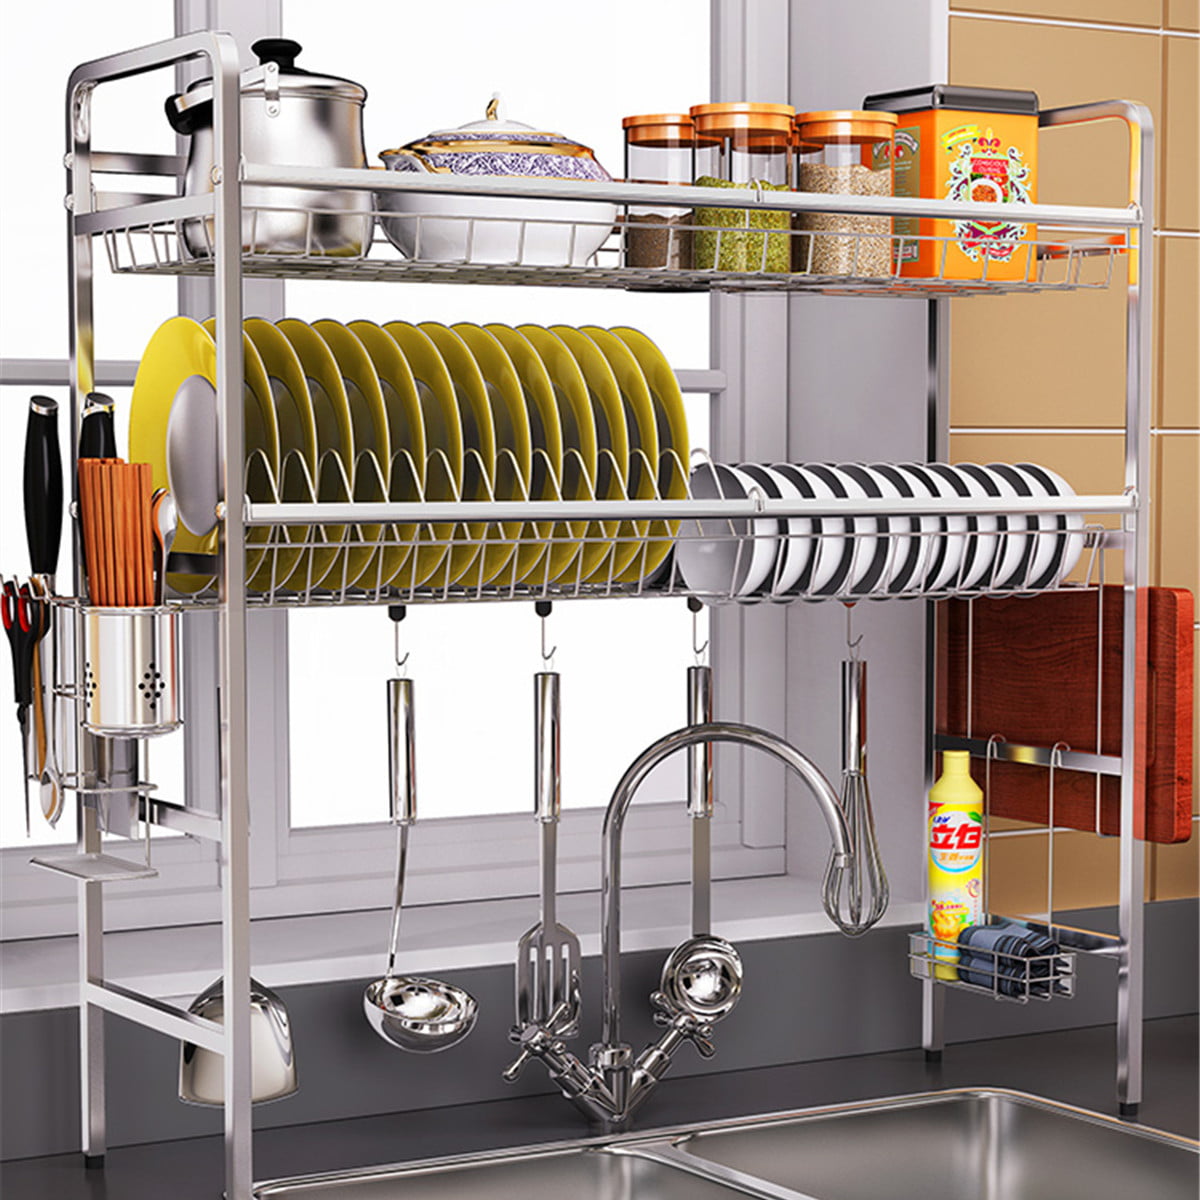 304 Stainless Steel 2 Tier Dish Drying Rack Over Sink Drainer Shelf Stainless Steel Stand For Kitchen